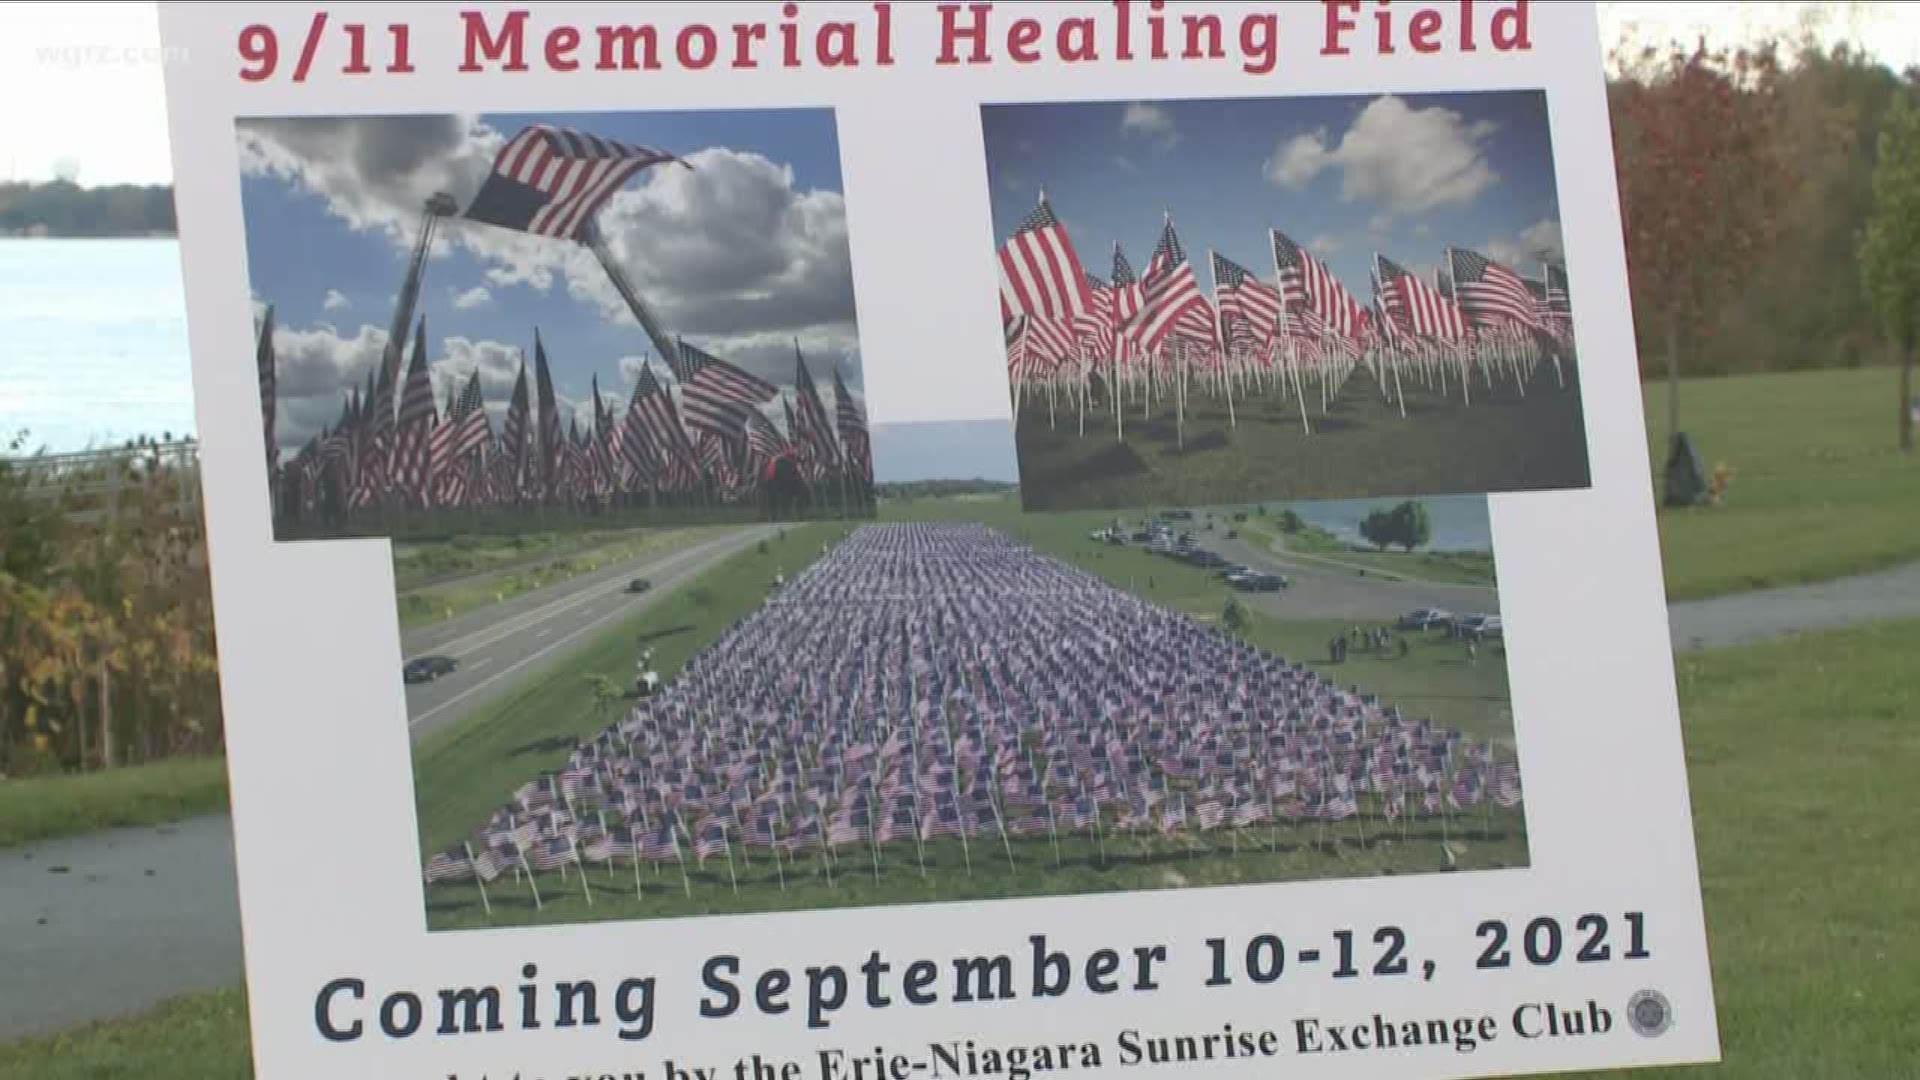 It'll include three thousand American flags with biographies of each of the people who died on that day.